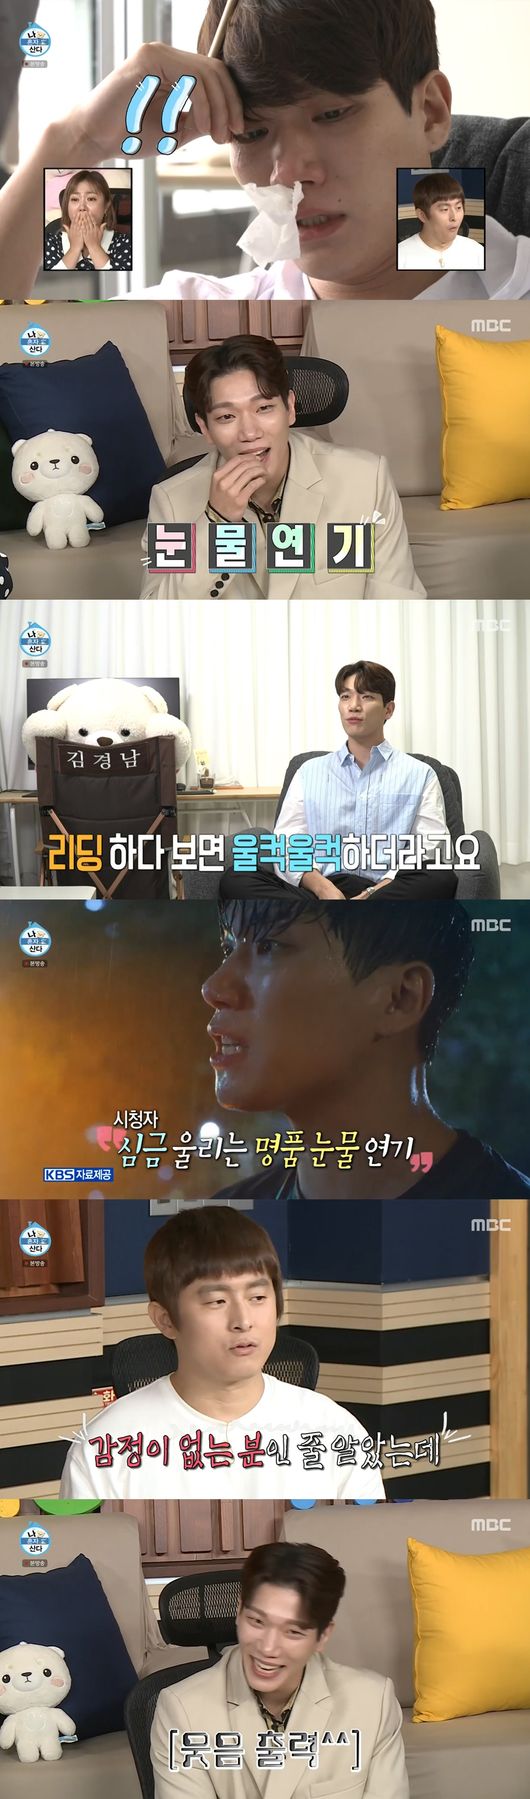 Actor Kim Gyeong-nams daily life has been revealed.MBC I Live Alone broadcast last day, the drama OK Photon in the drama Han Ye-seul is playing a hot role in the actor Kim Kyung-nams daily life was revealed.Kim Kyung-nam visited a Korean buffet for lunch. My friend introduced me for the first time, but the caustic rain was good.Kim Kyung-nam enjoyed eating rice with wild bibimbap and chicken. Kim Kyung-nam said, I wanted to eat it comfortably because it was a holiday for a long time.I ate rice quickly and ate it slower than usual. Kim went to the bedding store to buy Summer bedding, which was surprised to hear that Summer bedding was worth 140,000 One.I was really surprised. I first bought bedding. I thought it was 50,000 One for expensive. I dont seem to know the worlds best, Kim said.Kim Kyung-nam began to pick his bedding meticulously and carefully; Kim Ji-hoon praised him as a huge housekeeper.Kim Kyung-nam first picked a cheap bedding and eventually chose the expensive bedding he liked at first.As soon as Kim came home, he changed his baro beding, which he also arranged for electric plates that he could not remove from one Summer and replaced his bedding with a new beding.Kim Kyung-nam started cleaning up. Kian84, who saw it, said, Its not so much to say, but its dry.After cleaning, Kim started practicing the Baro drama OK Photon script, which surprised him by showing his Baro tears as he read the script.Kim Kyung-nam said, It seems that the emotions are piled up in the second half of the work. Kian84 laughed, saying, I thought I was a person without feelings.Kim started to clean up the laundry after the script practice. Kim Kyung-nam started to hang the laundry in the corner of the house when he lacked the laundry hanger.Is it humidified and bad for Summer, said Kian84, making the surroundings a laughing sea, so Park Na-rae said, When you put a humidifier on Summer, you grow mushrooms.Kim Kyung-nam was washing laundry, but he started baking meat for dinner and laughed. Kim Kyung-nam ate at home but put food on the plate.I put a little bit of food in it, so it was easy to wash dishes. Kim Kyung-nam enjoyed a meal with a beer.After finishing the meal and washing dishes, I started the chin hanger installed on the door frame and made the surroundings surprised.Kim Ji-hoon said, I really like it when I install it like that at home. He suggested, Lets meet later and we will do it together.Kim Kyung-nam began writing a diary after finishing Haru. Kim Kyung-nam said, I wrote a handbook in the army and I have been writing it since then. I have been writing it almost every day for 13 years.Kim Kyung-nam said, I wrote a diary and always signed it. I thought it would be good if it worked out.Kim Kyung-nam read Harus diary and showed tears. Kim Kyung-nam said, Ive been really busy these days, and I think I have a lot to miss.Kim Kyung-nam laughed at his daily life by saying, I am dry because I have no words.MBC I Live Alone broadcast capture